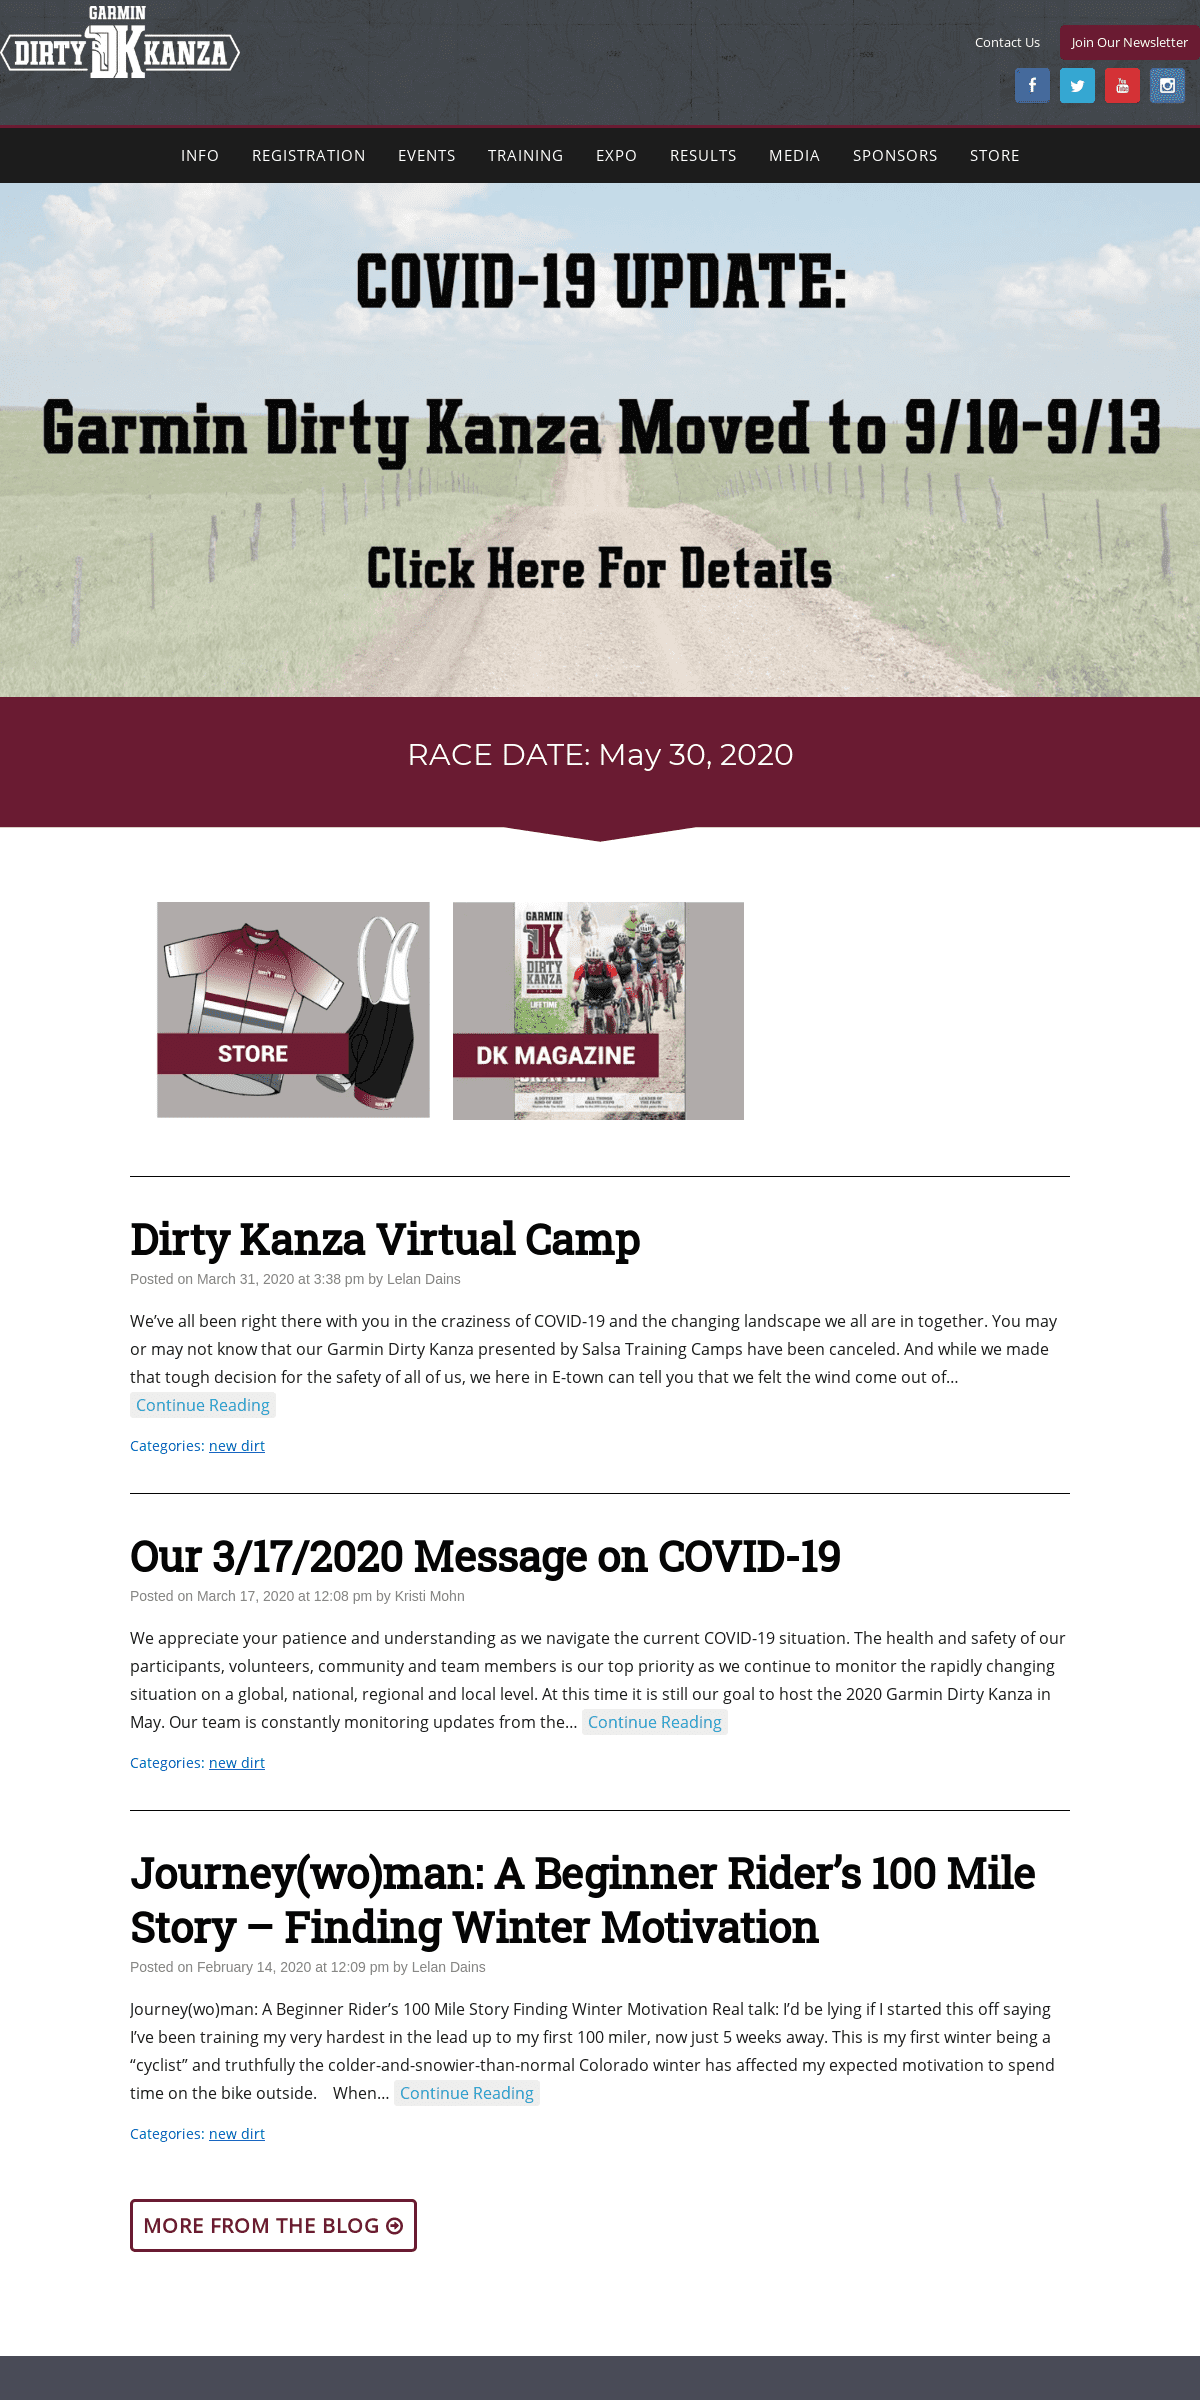 A complete backup of dirtykanza.com